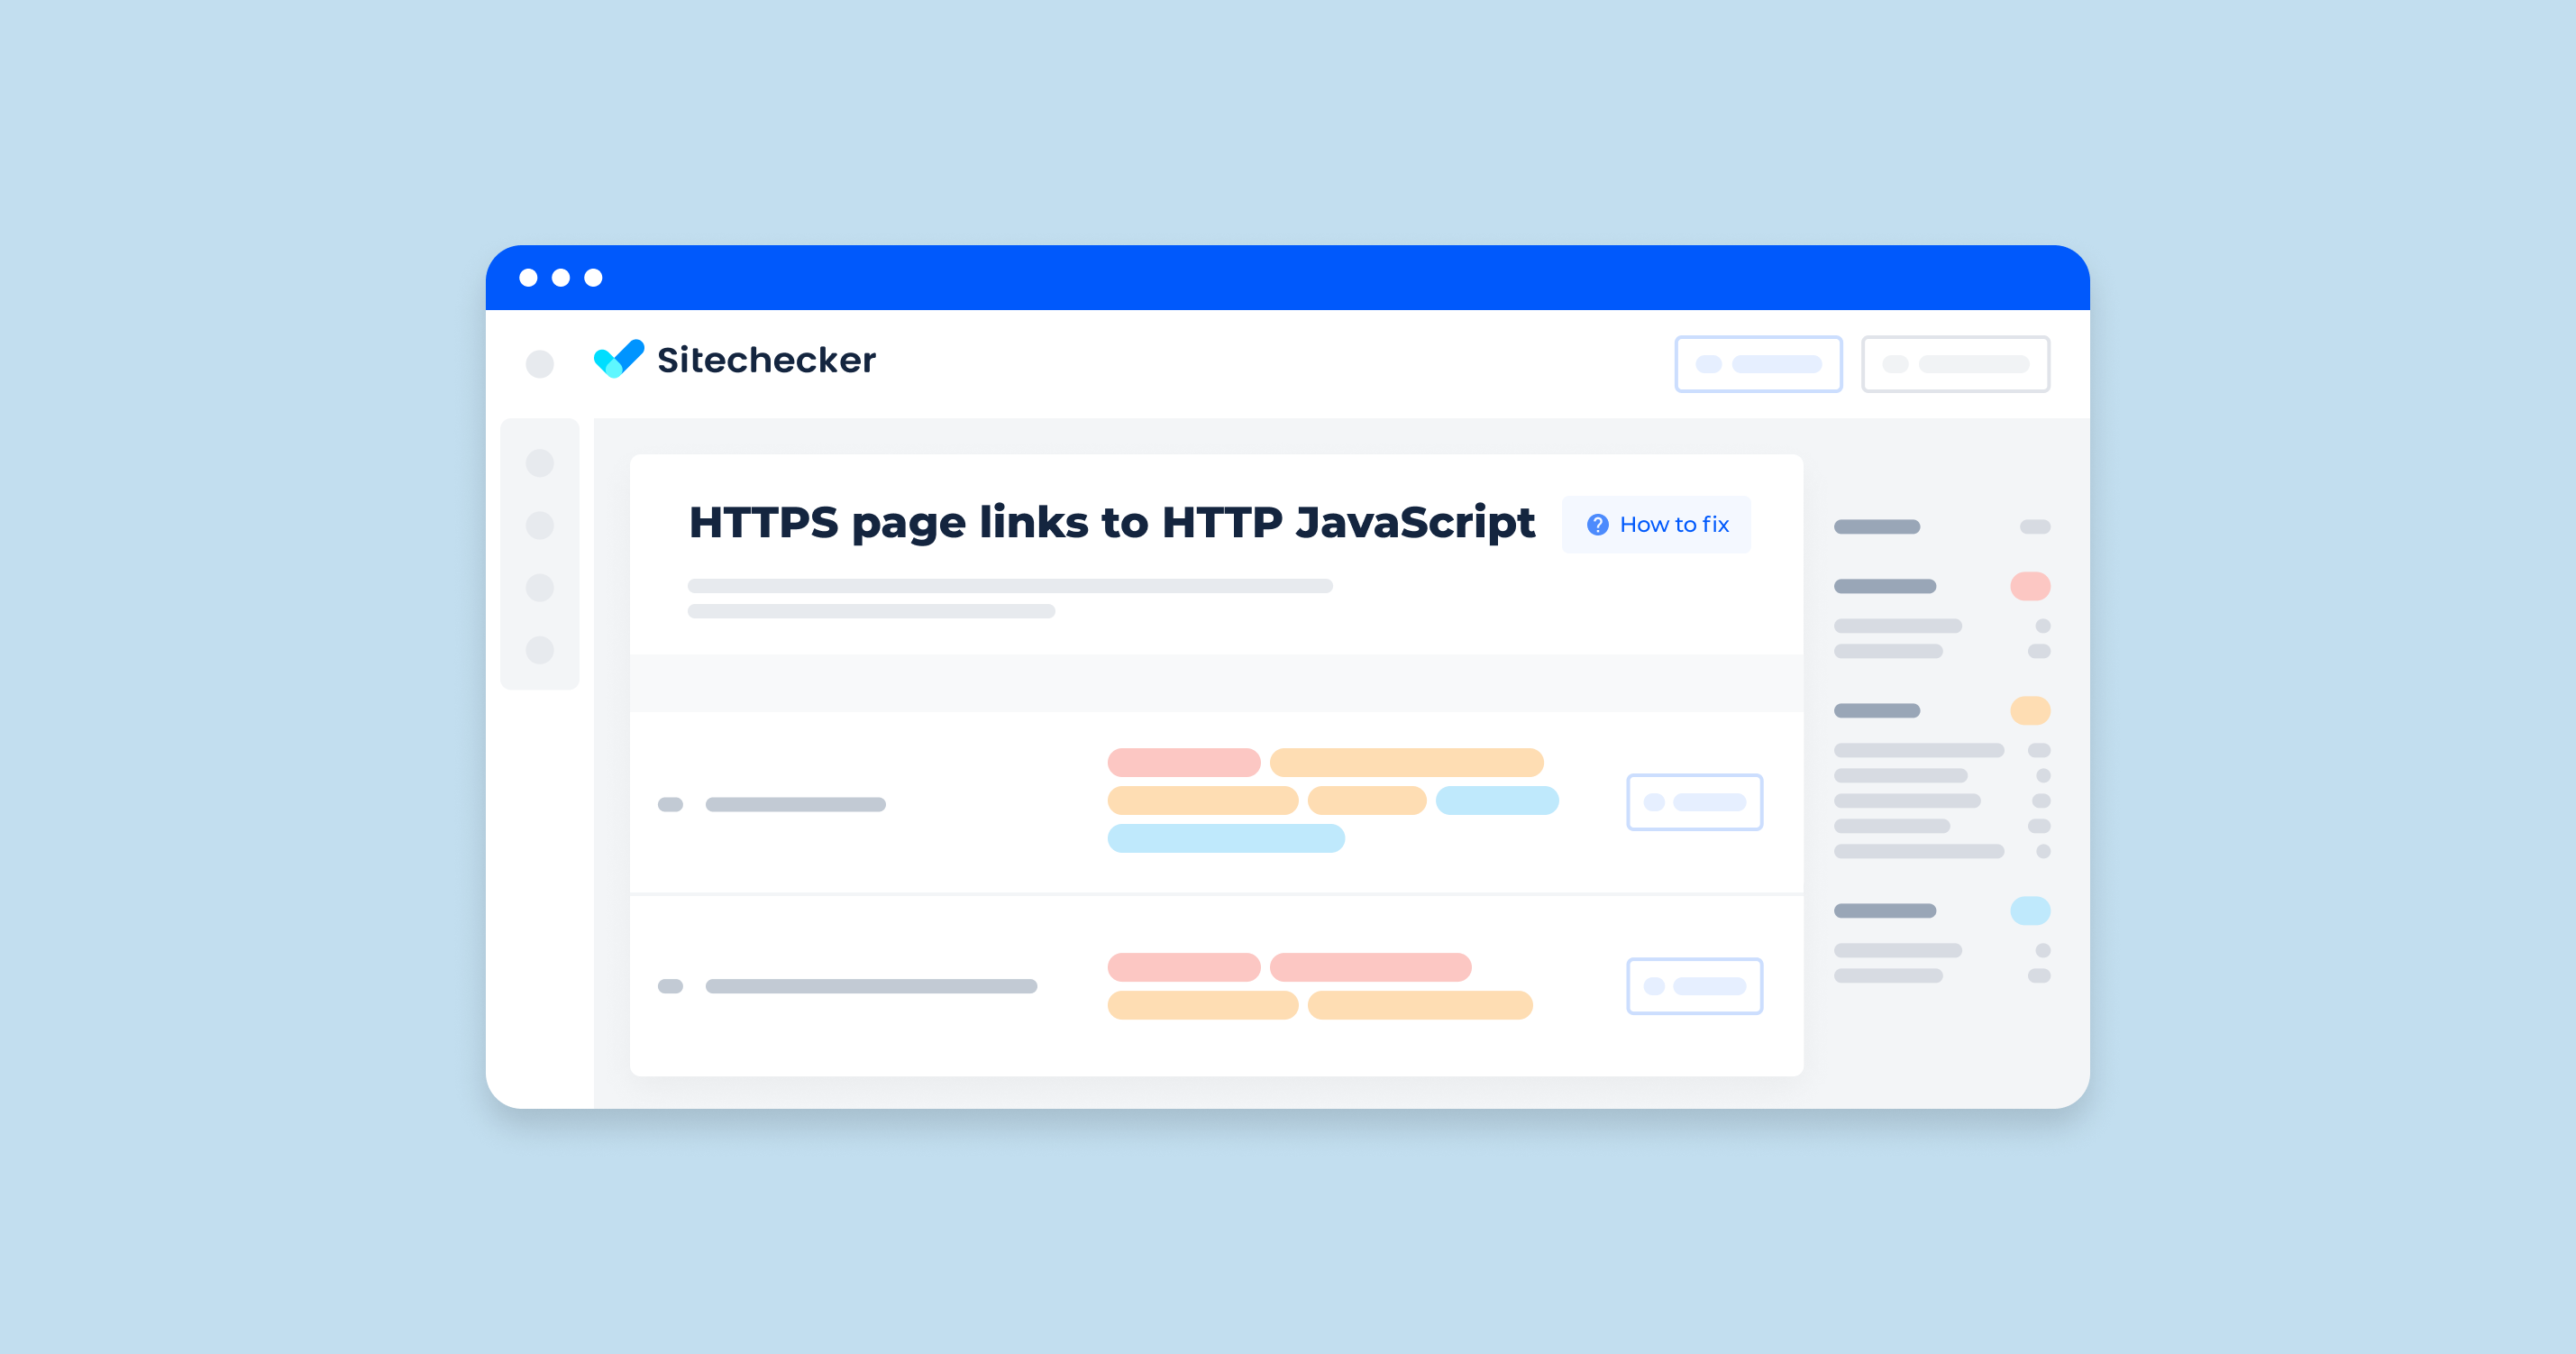 What Happens If HTTPS Links To HTTP JavaScript?